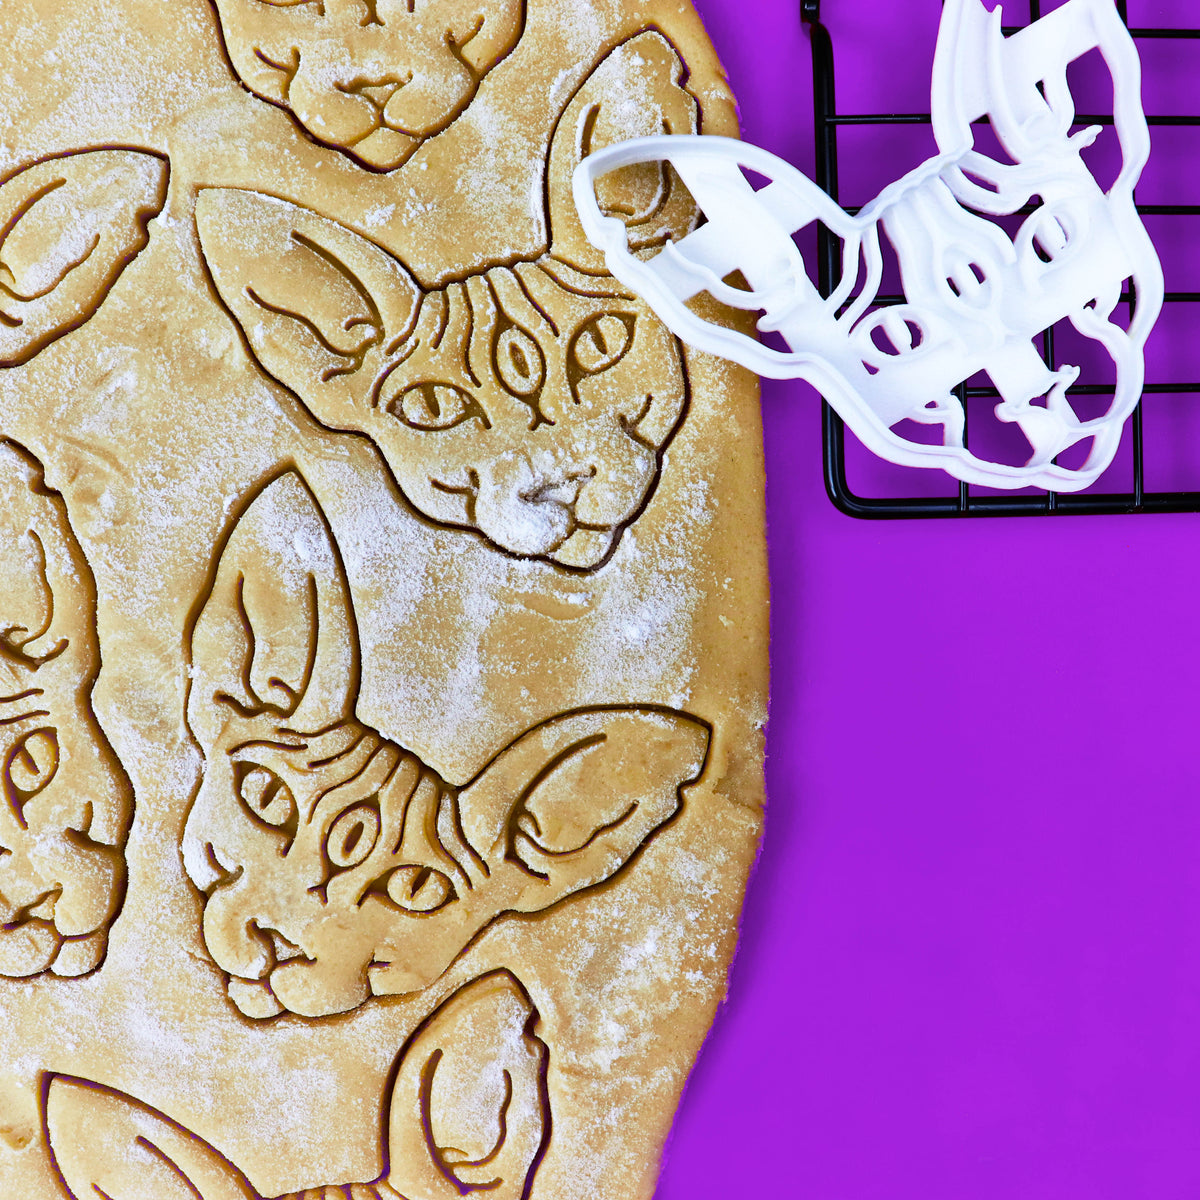 Sphynx Cat with 3rd Eye Cookie Cutter